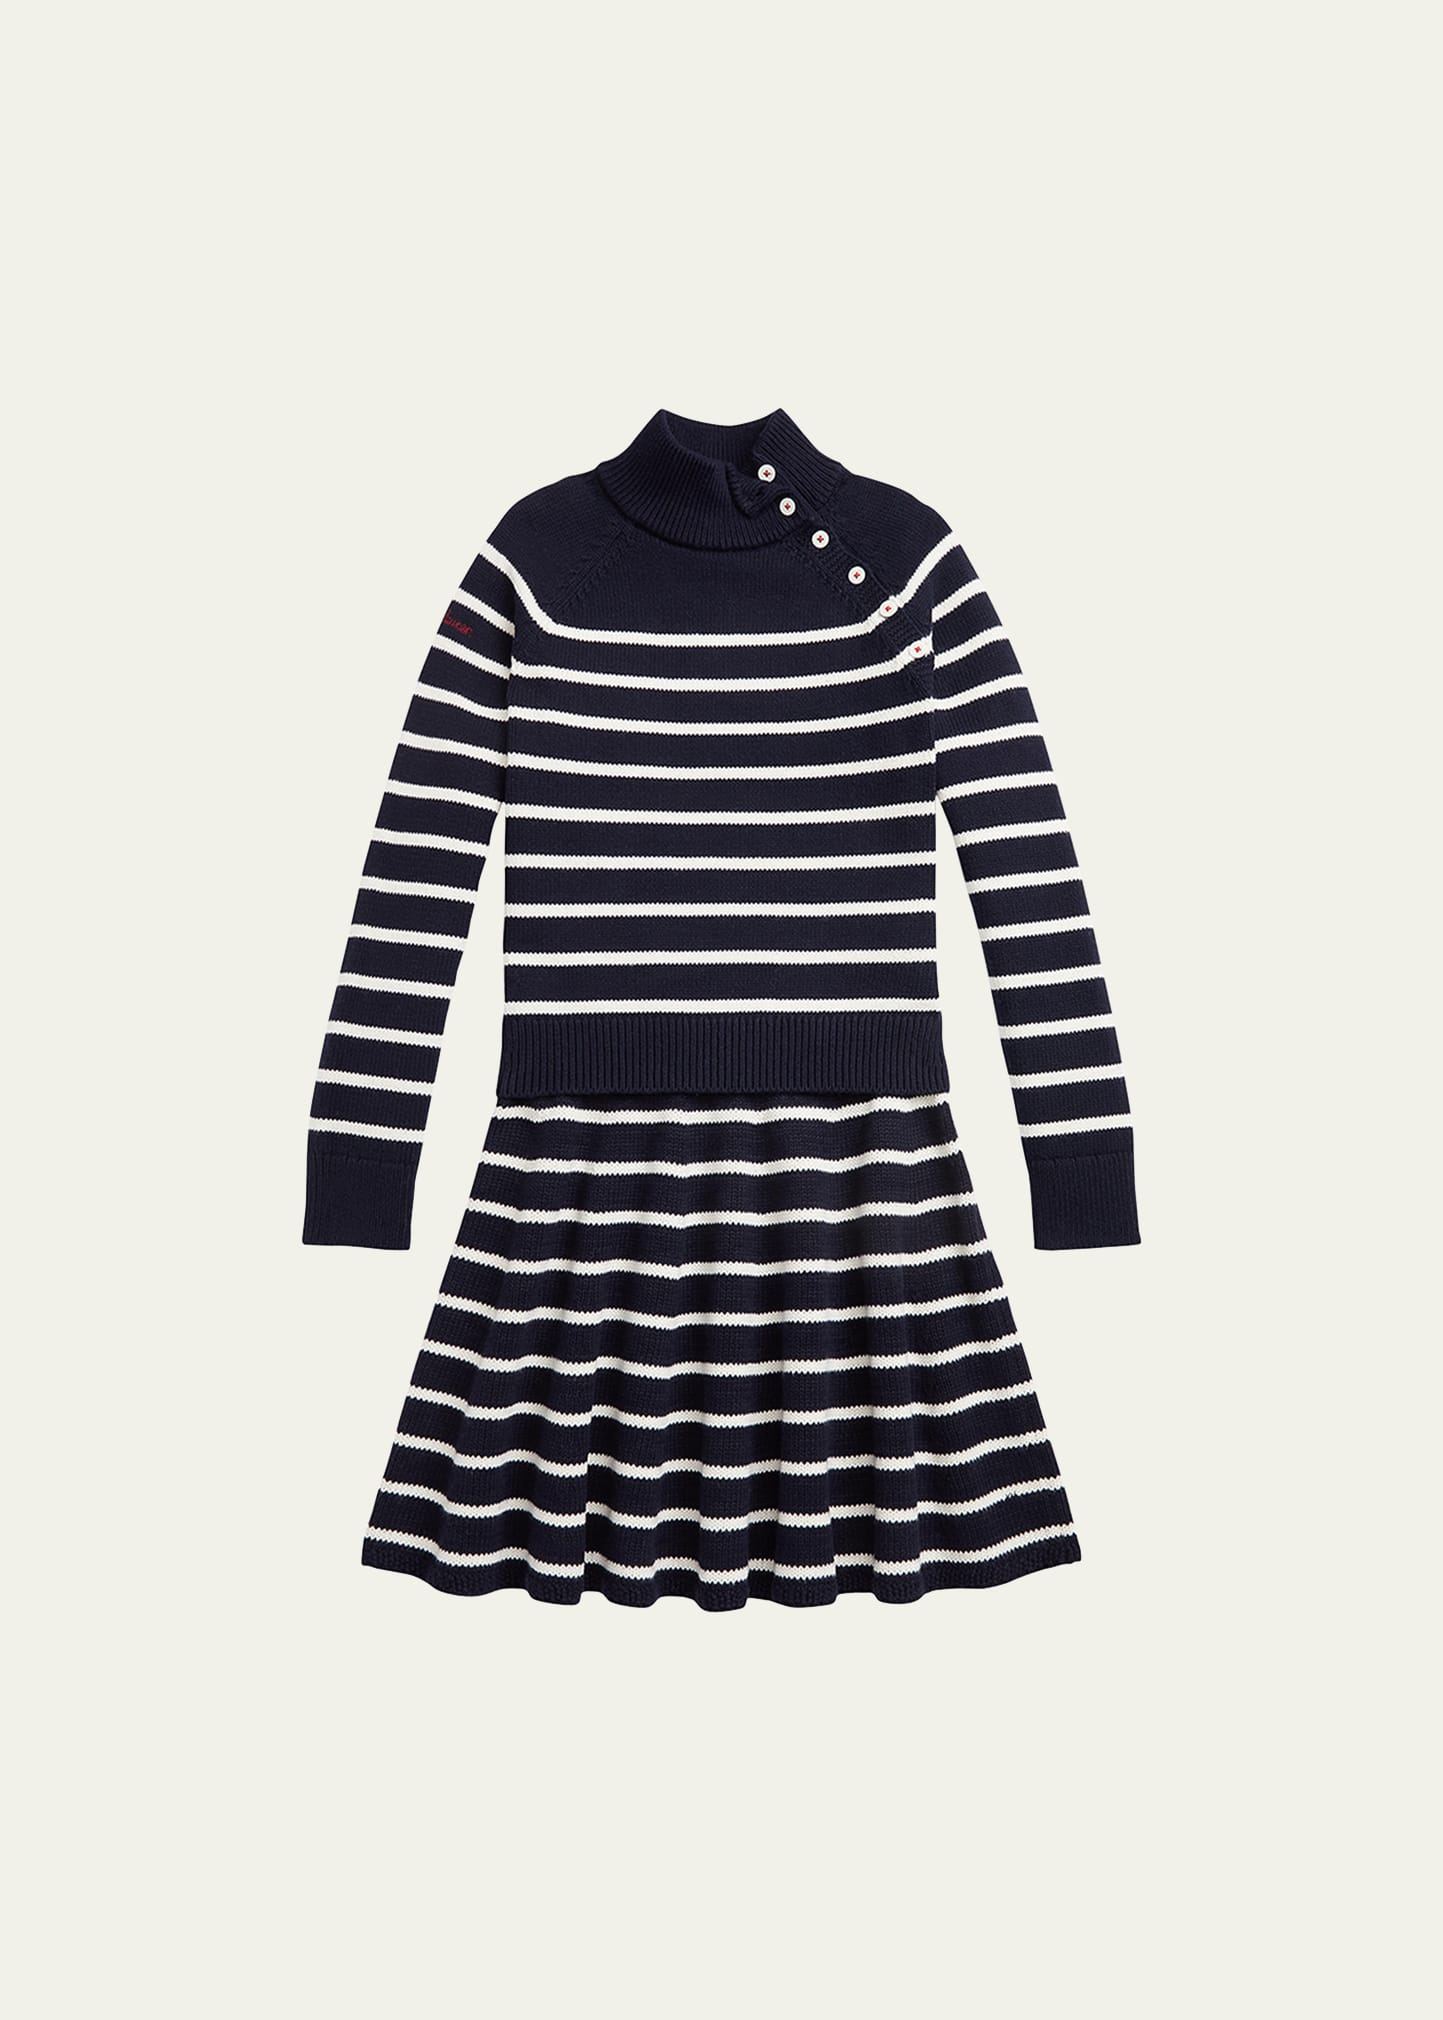 Girl's Two-Piece Nautical Striped Sweater & Skirt Set, Size S-XL